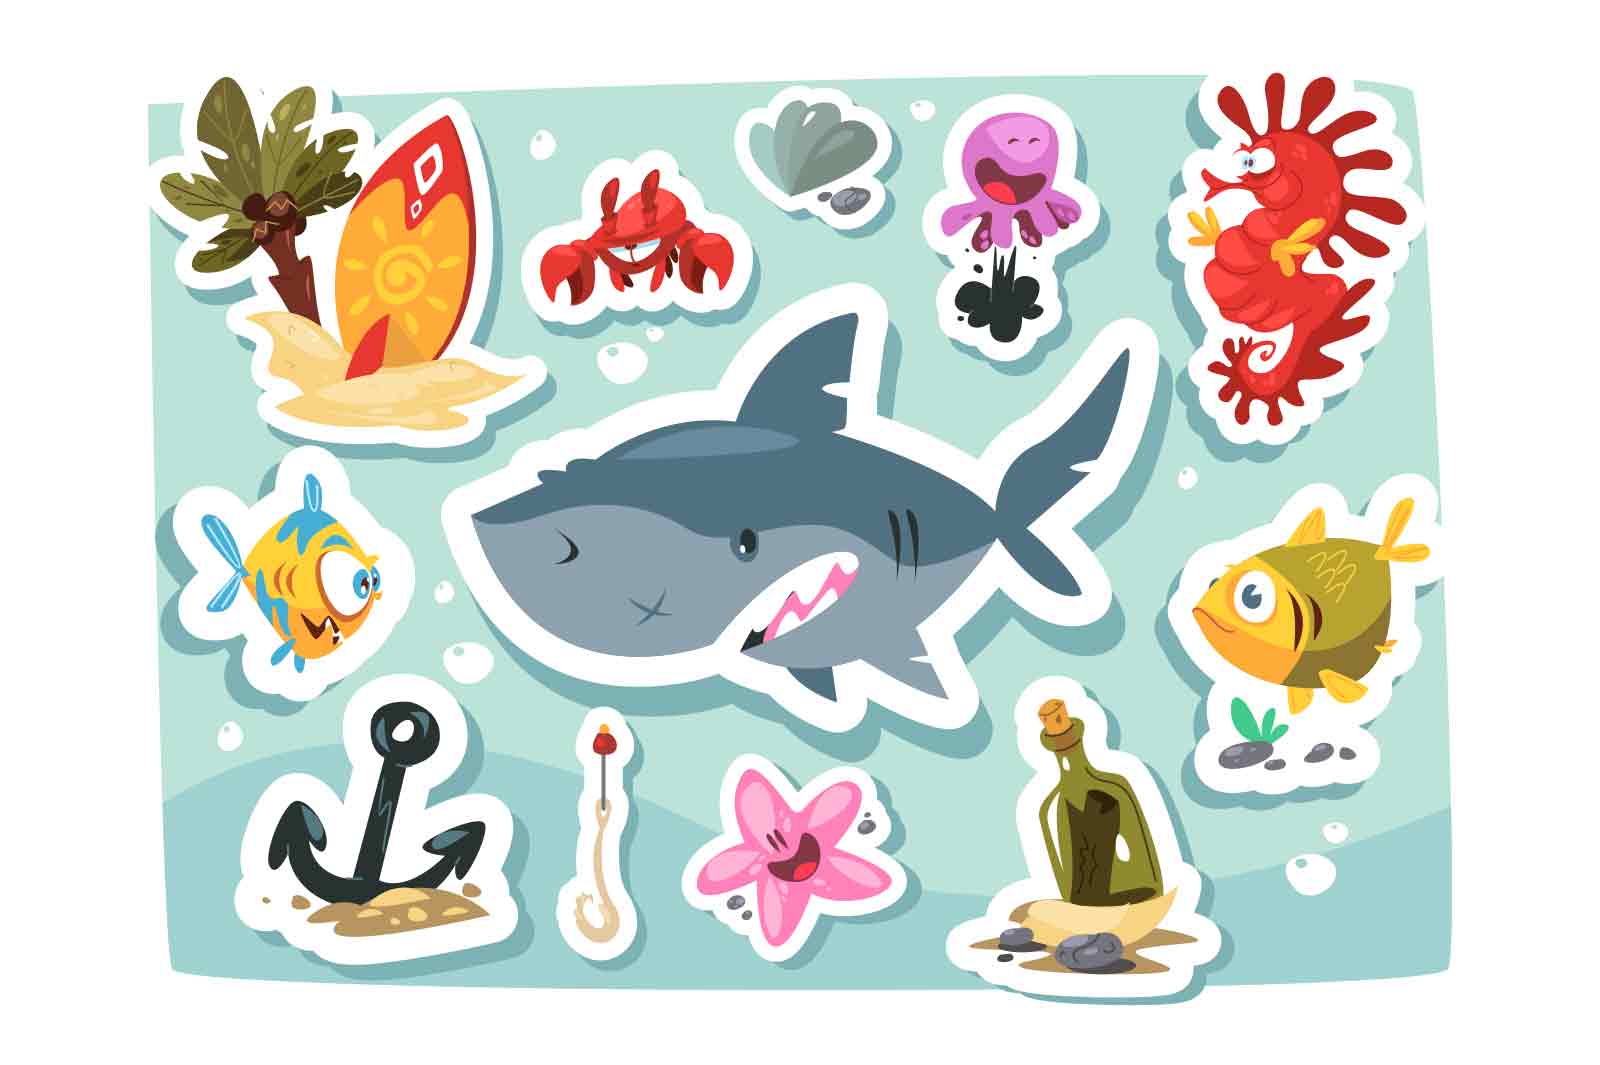 Underwater animals stickers set vector illustration. Cute sea animals shark, fishes, crab, octopus, sea horse, anchor and bottle with letter